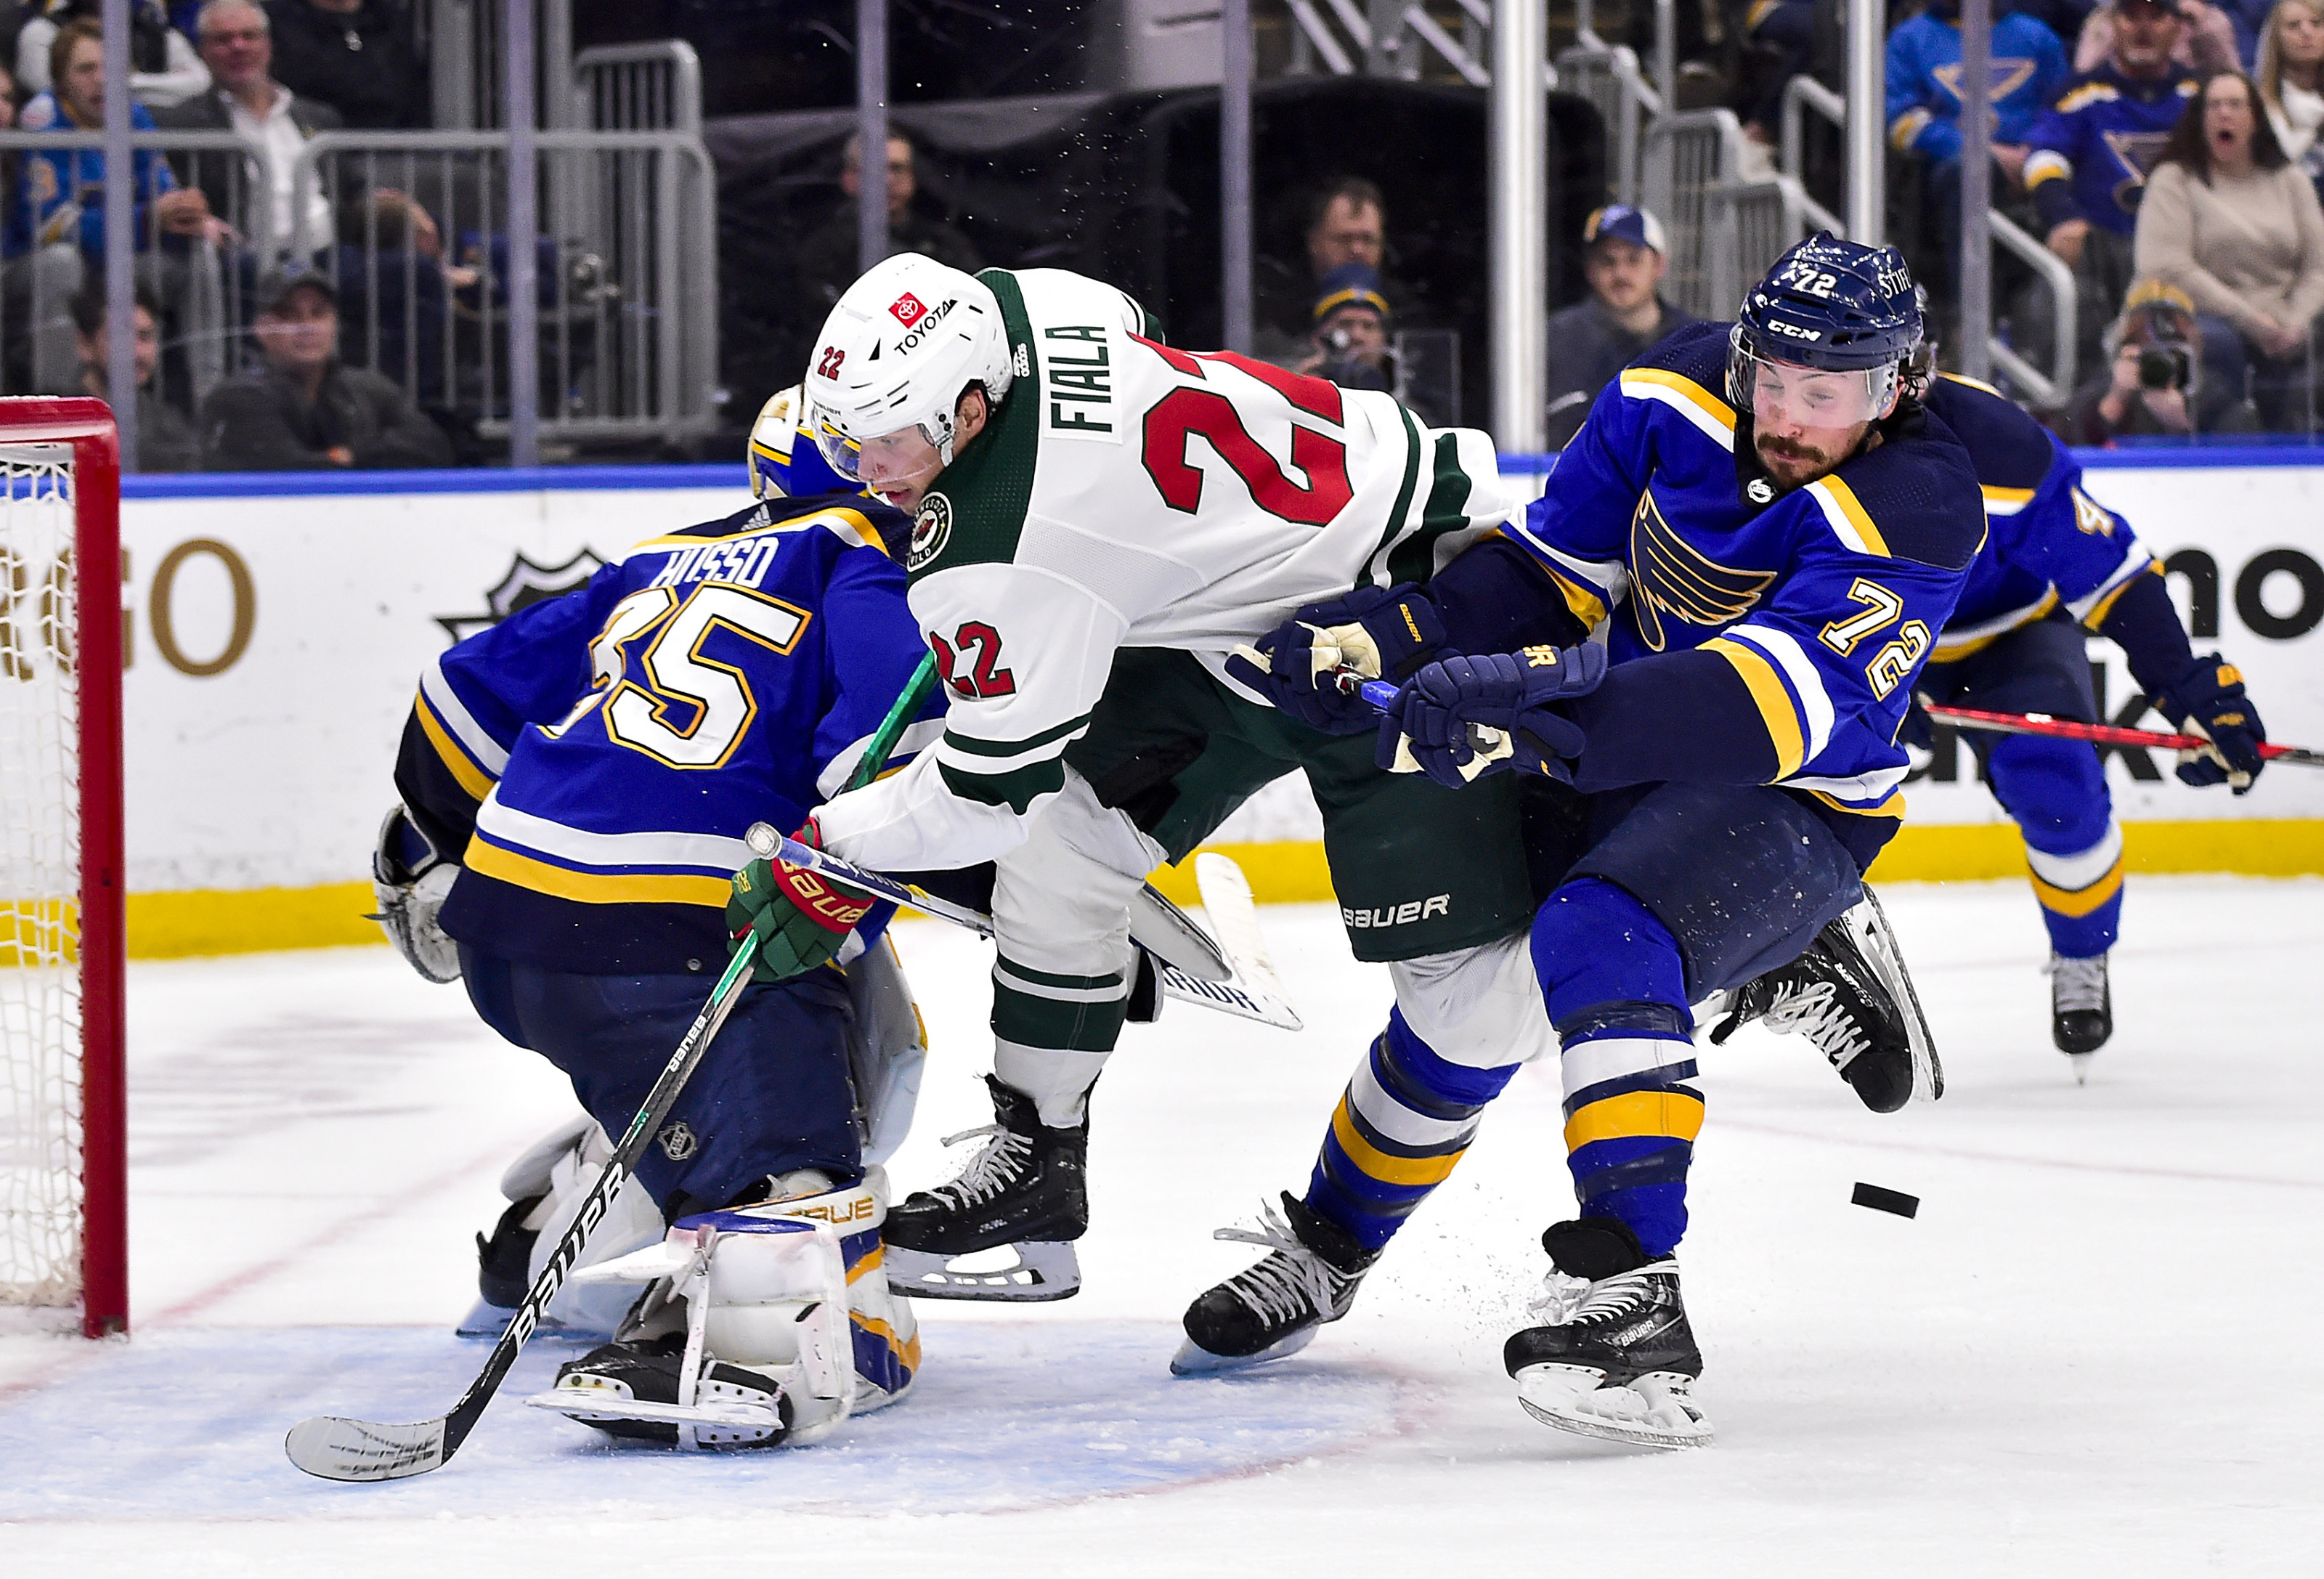 St. Louis Boos: Five reasons to jeer the Wild's first-round opponent